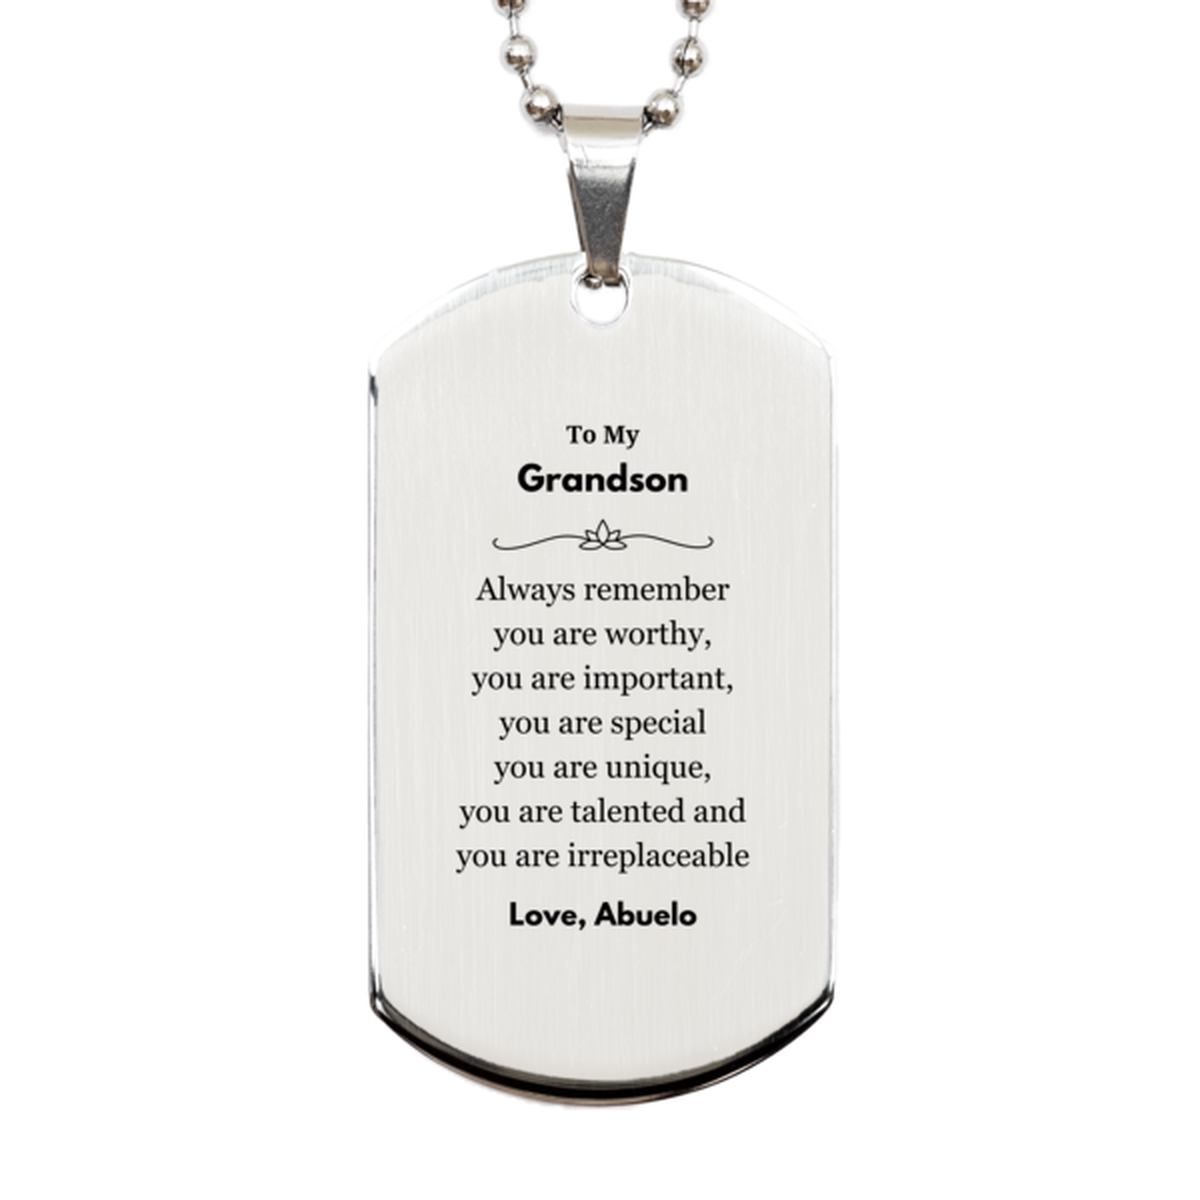 Grandson Birthday Gifts from Abuelo, Inspirational Silver Dog Tag for Grandson Christmas Graduation Gifts for Grandson Always remember you are worthy, you are important. Love, Abuelo